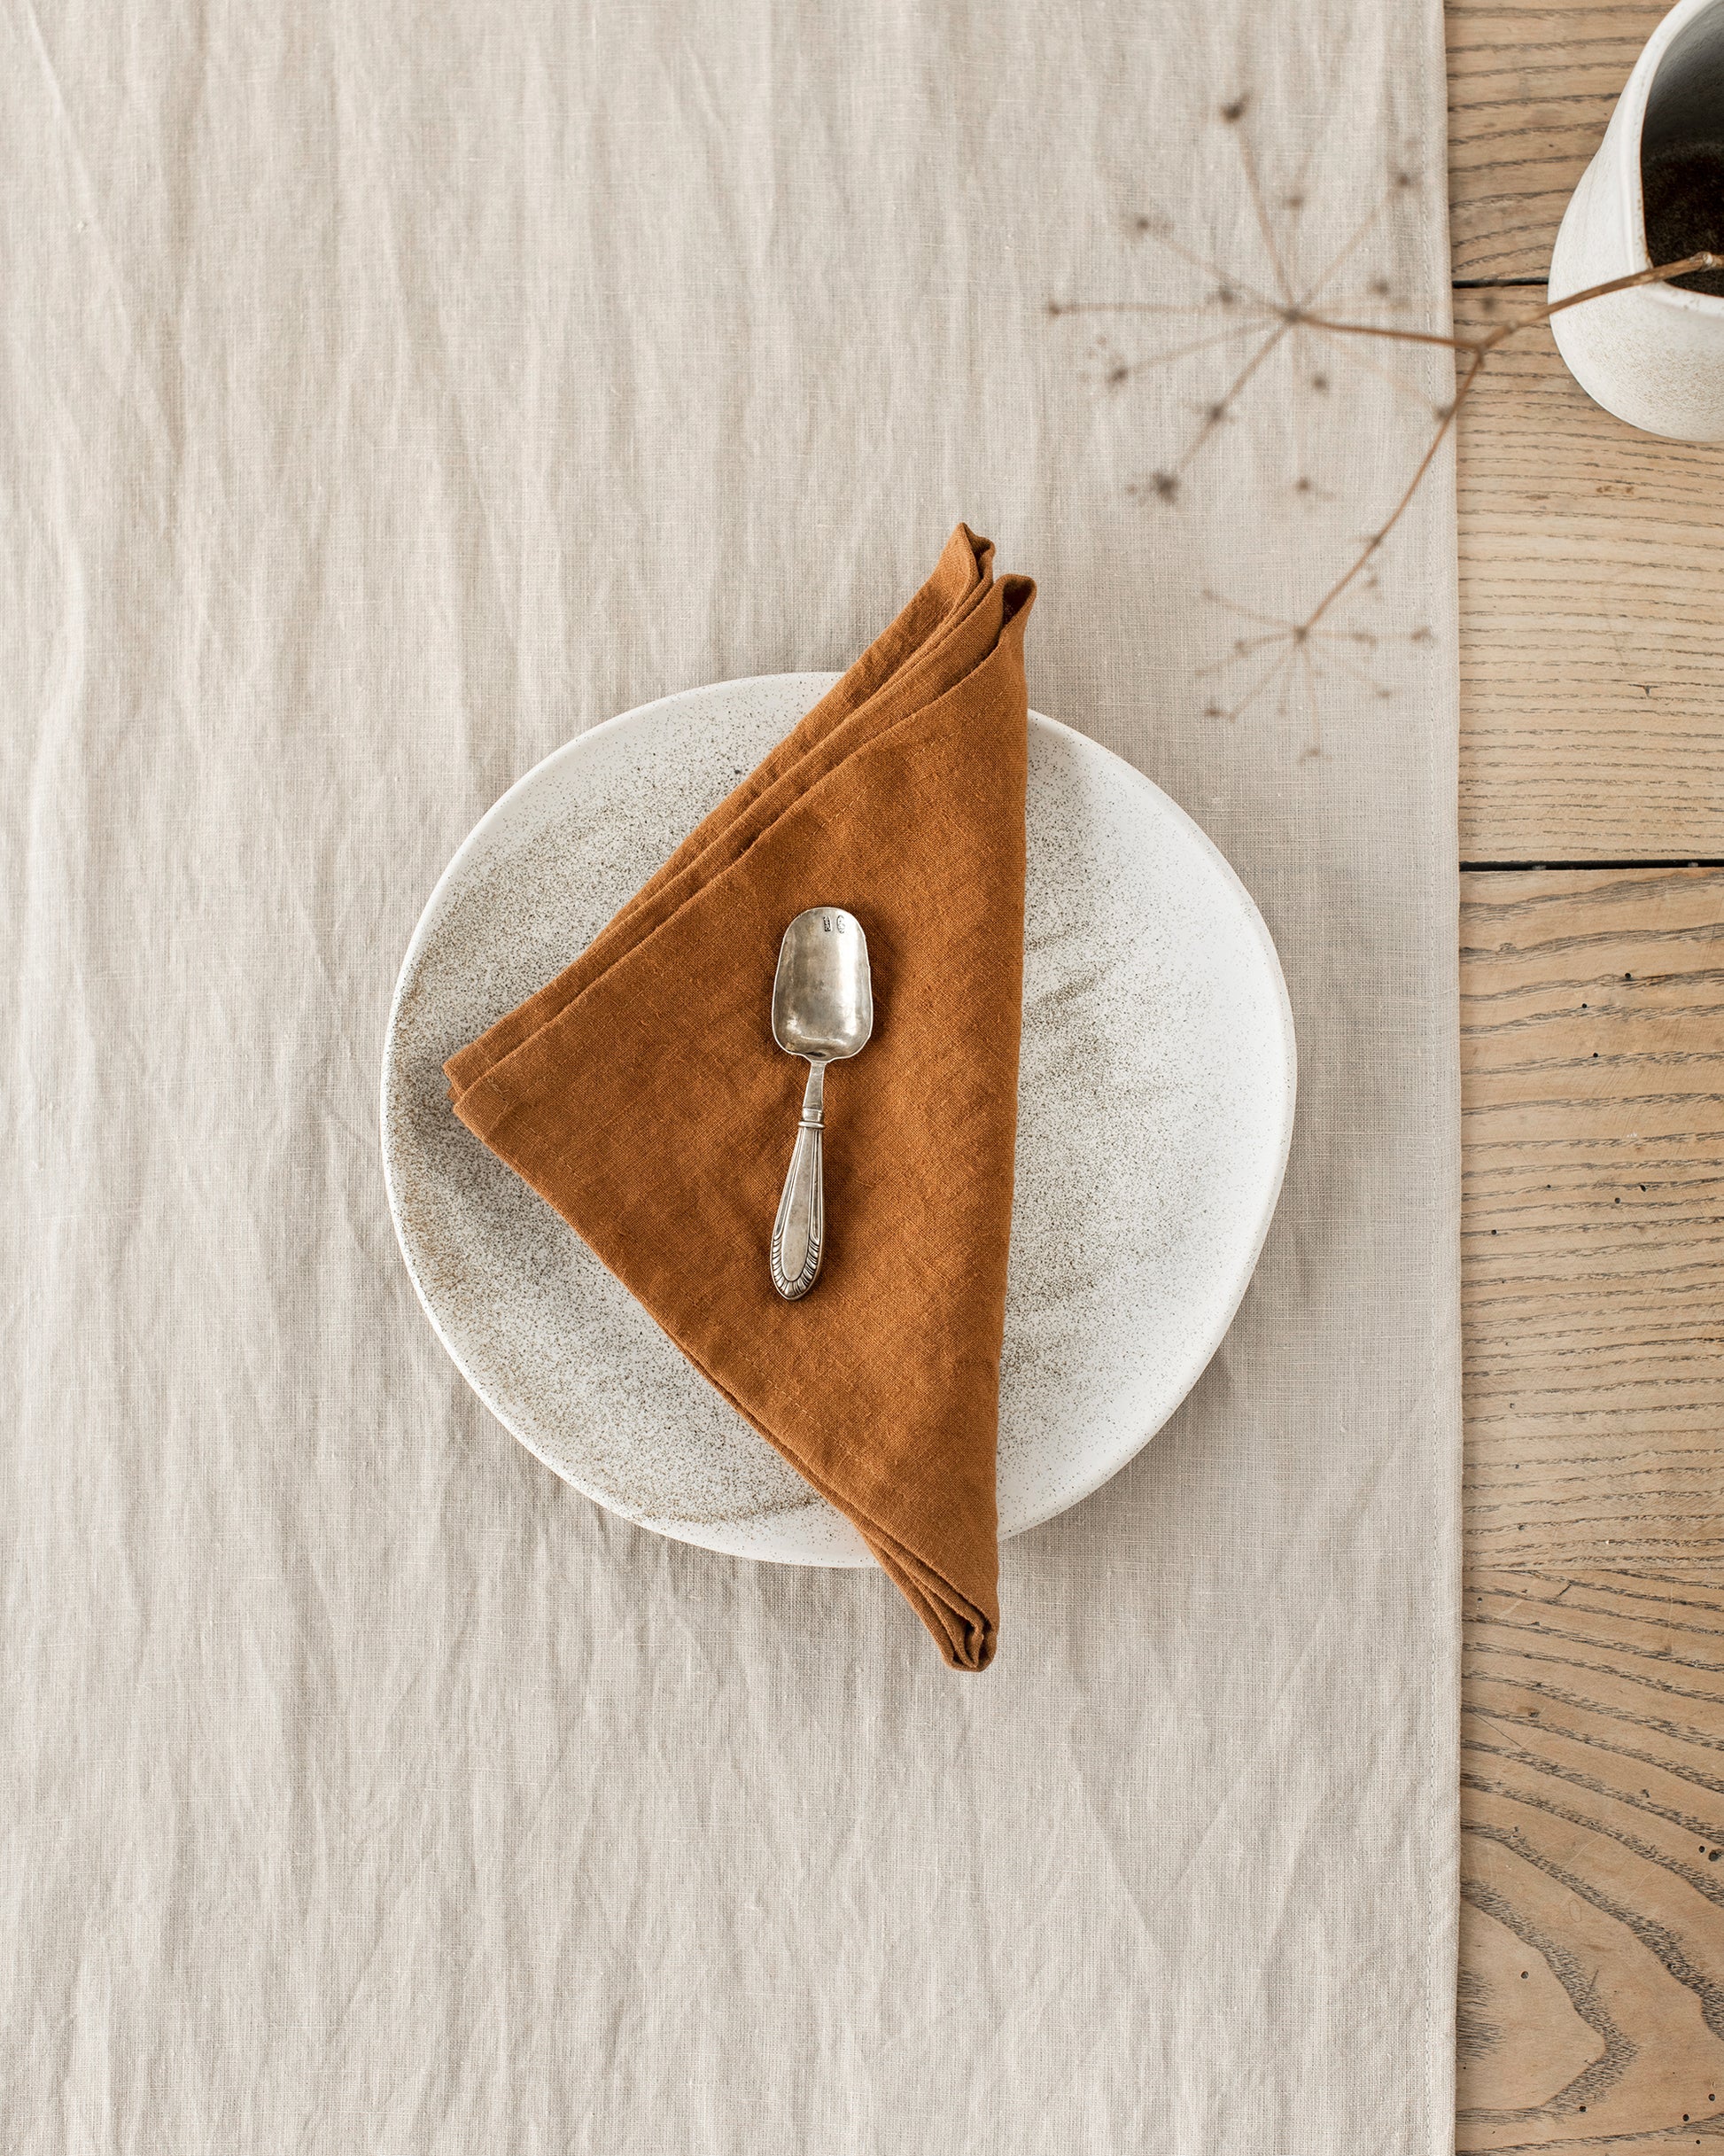 MagicLinen Napkin Set in Cinnamon at Urban Outfitters